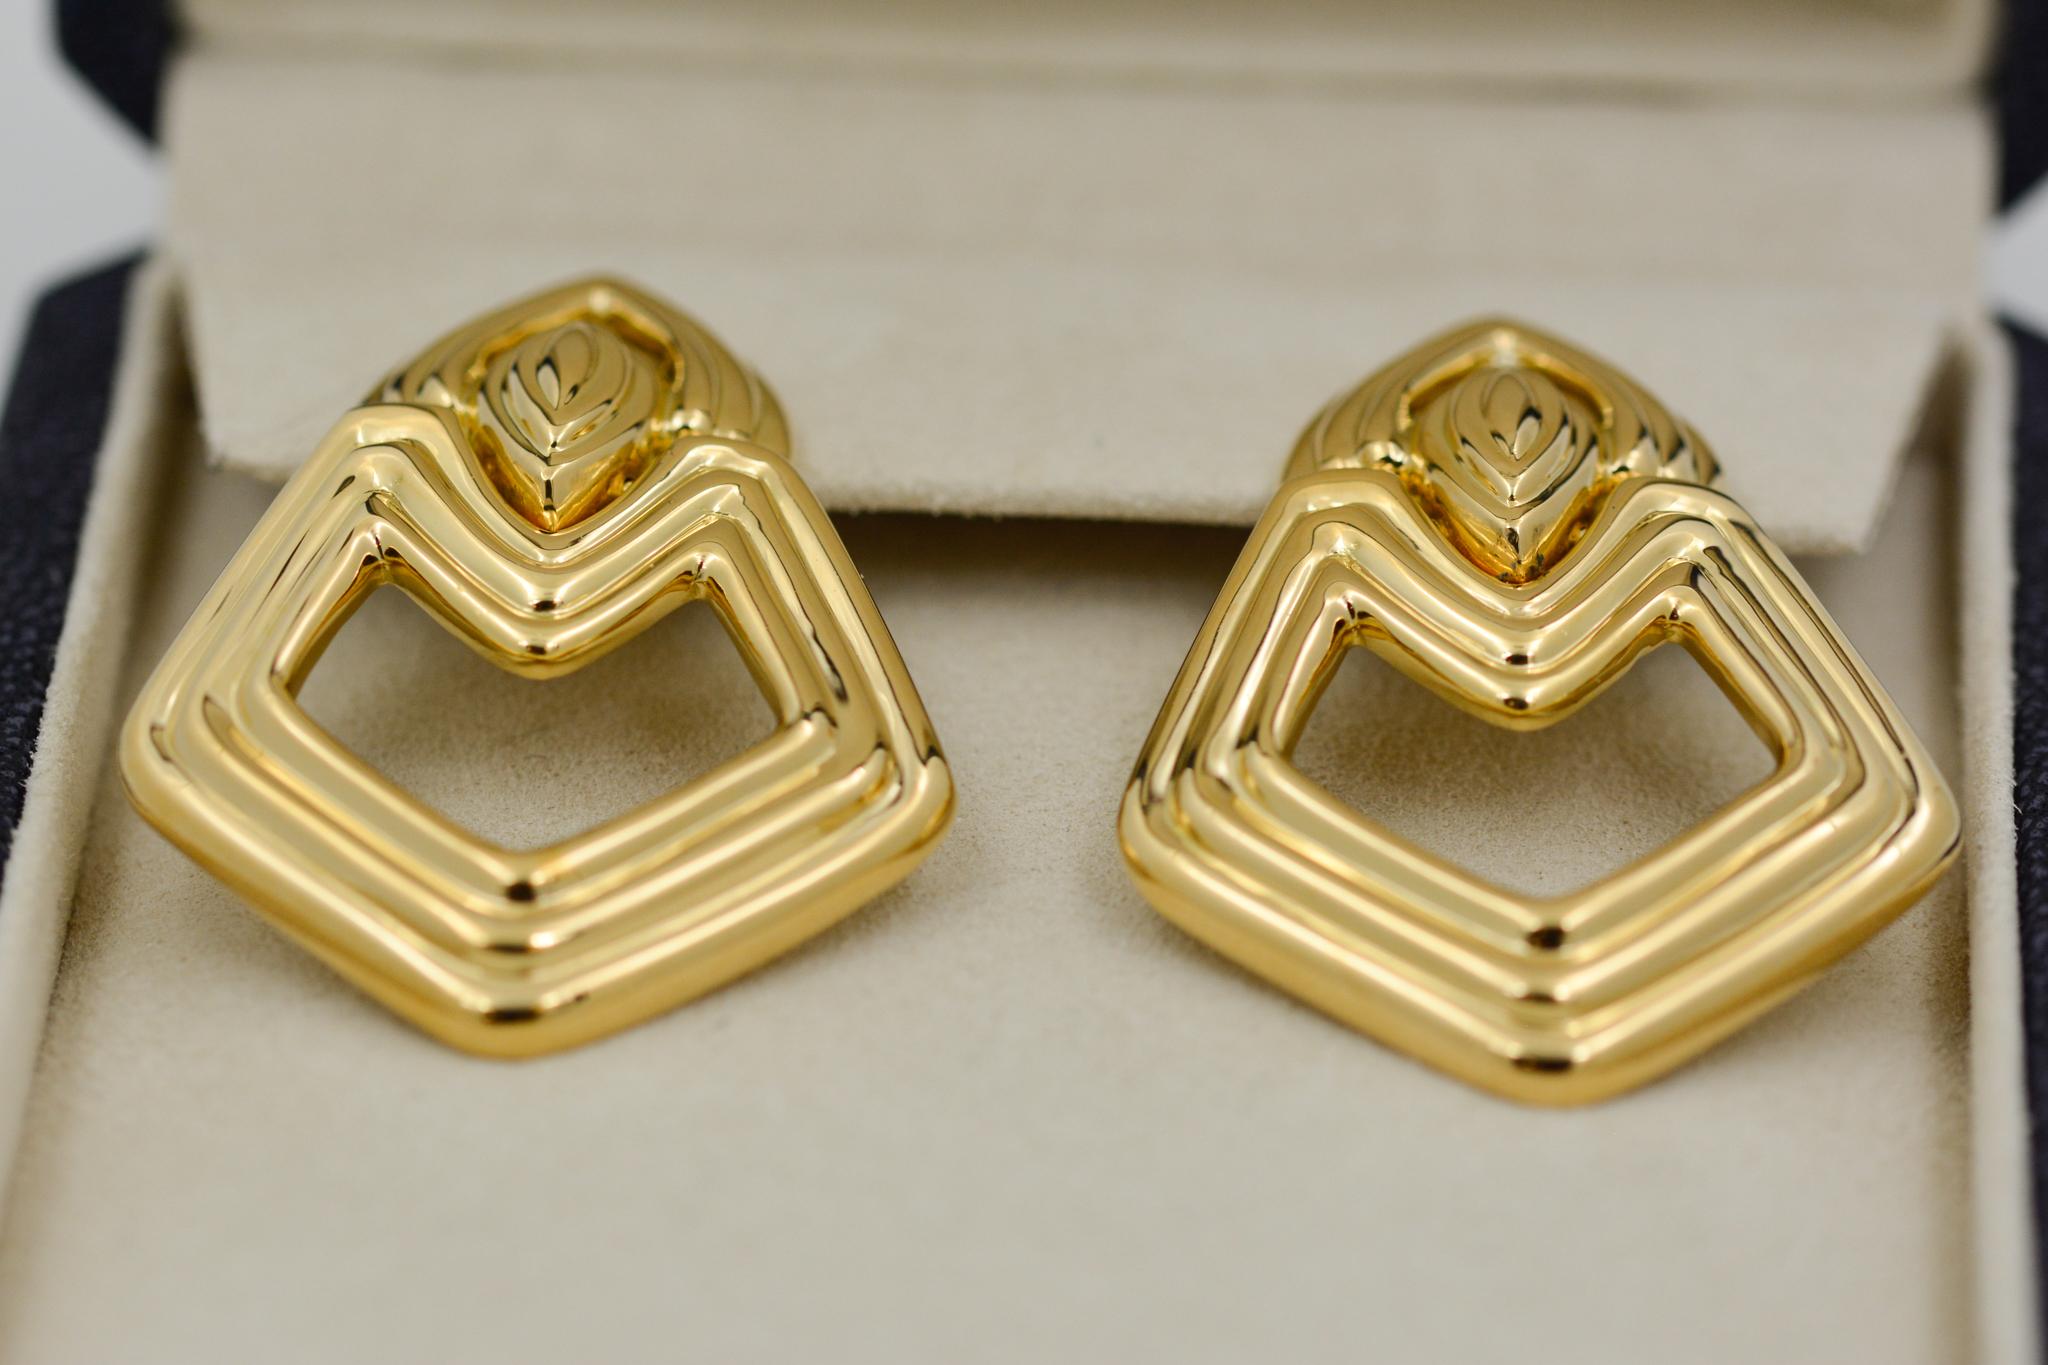 These 18 karat yellow gold earrings from Turi are crafted in a door knocker design with a high polished ribbed finish and have omega post backs. 